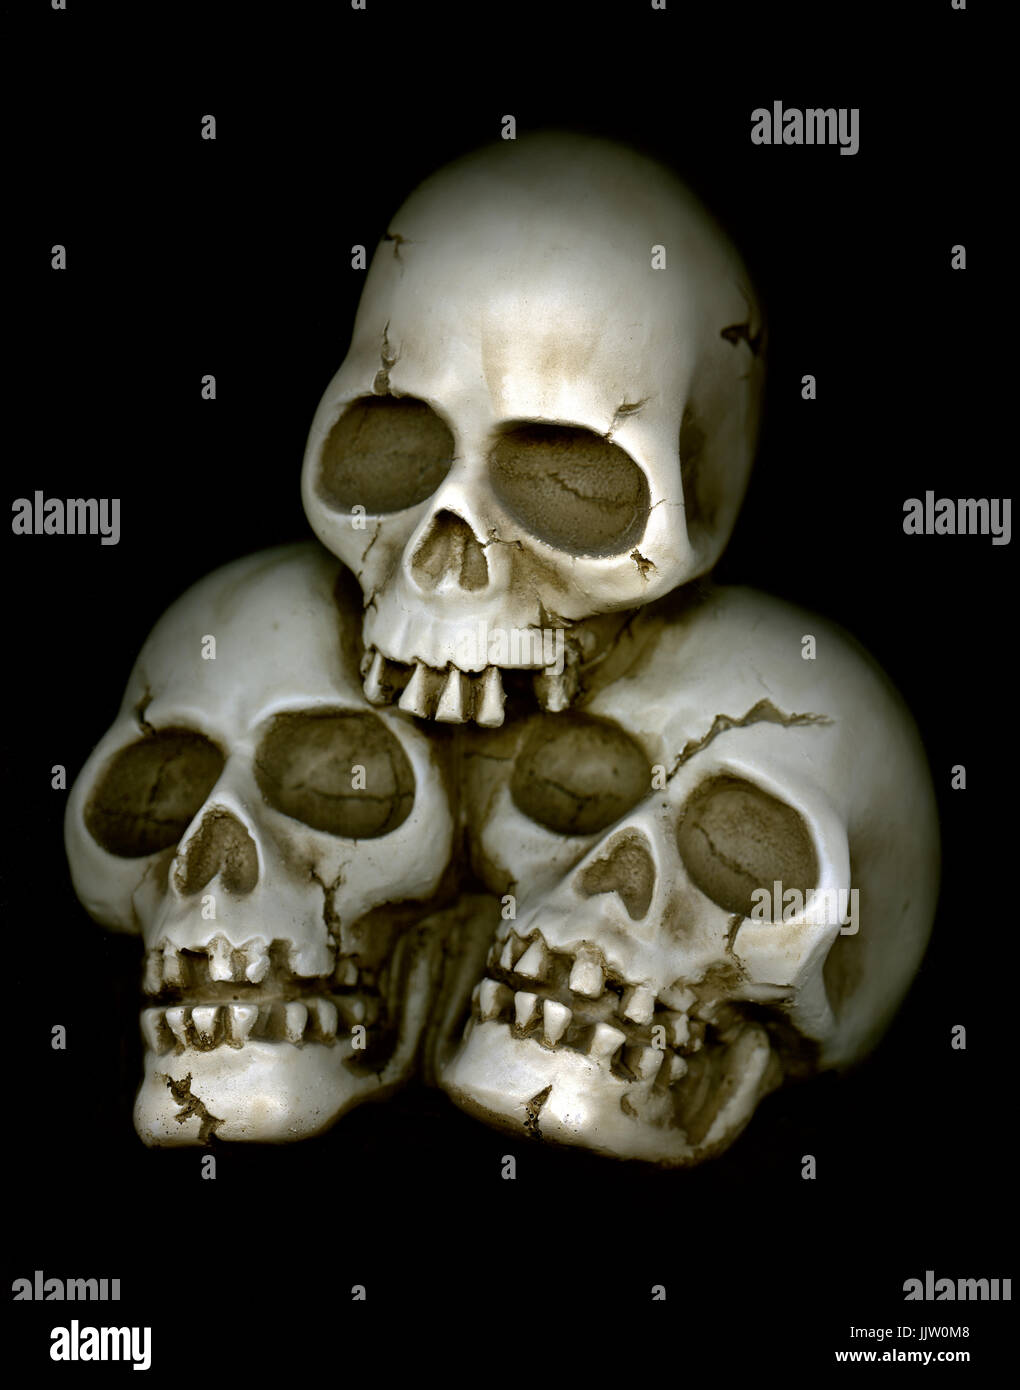 SKULLS  GROUP DEATH DEAD concept 3 skulls close together in a ghoulish deathly group embrace Stock Photo